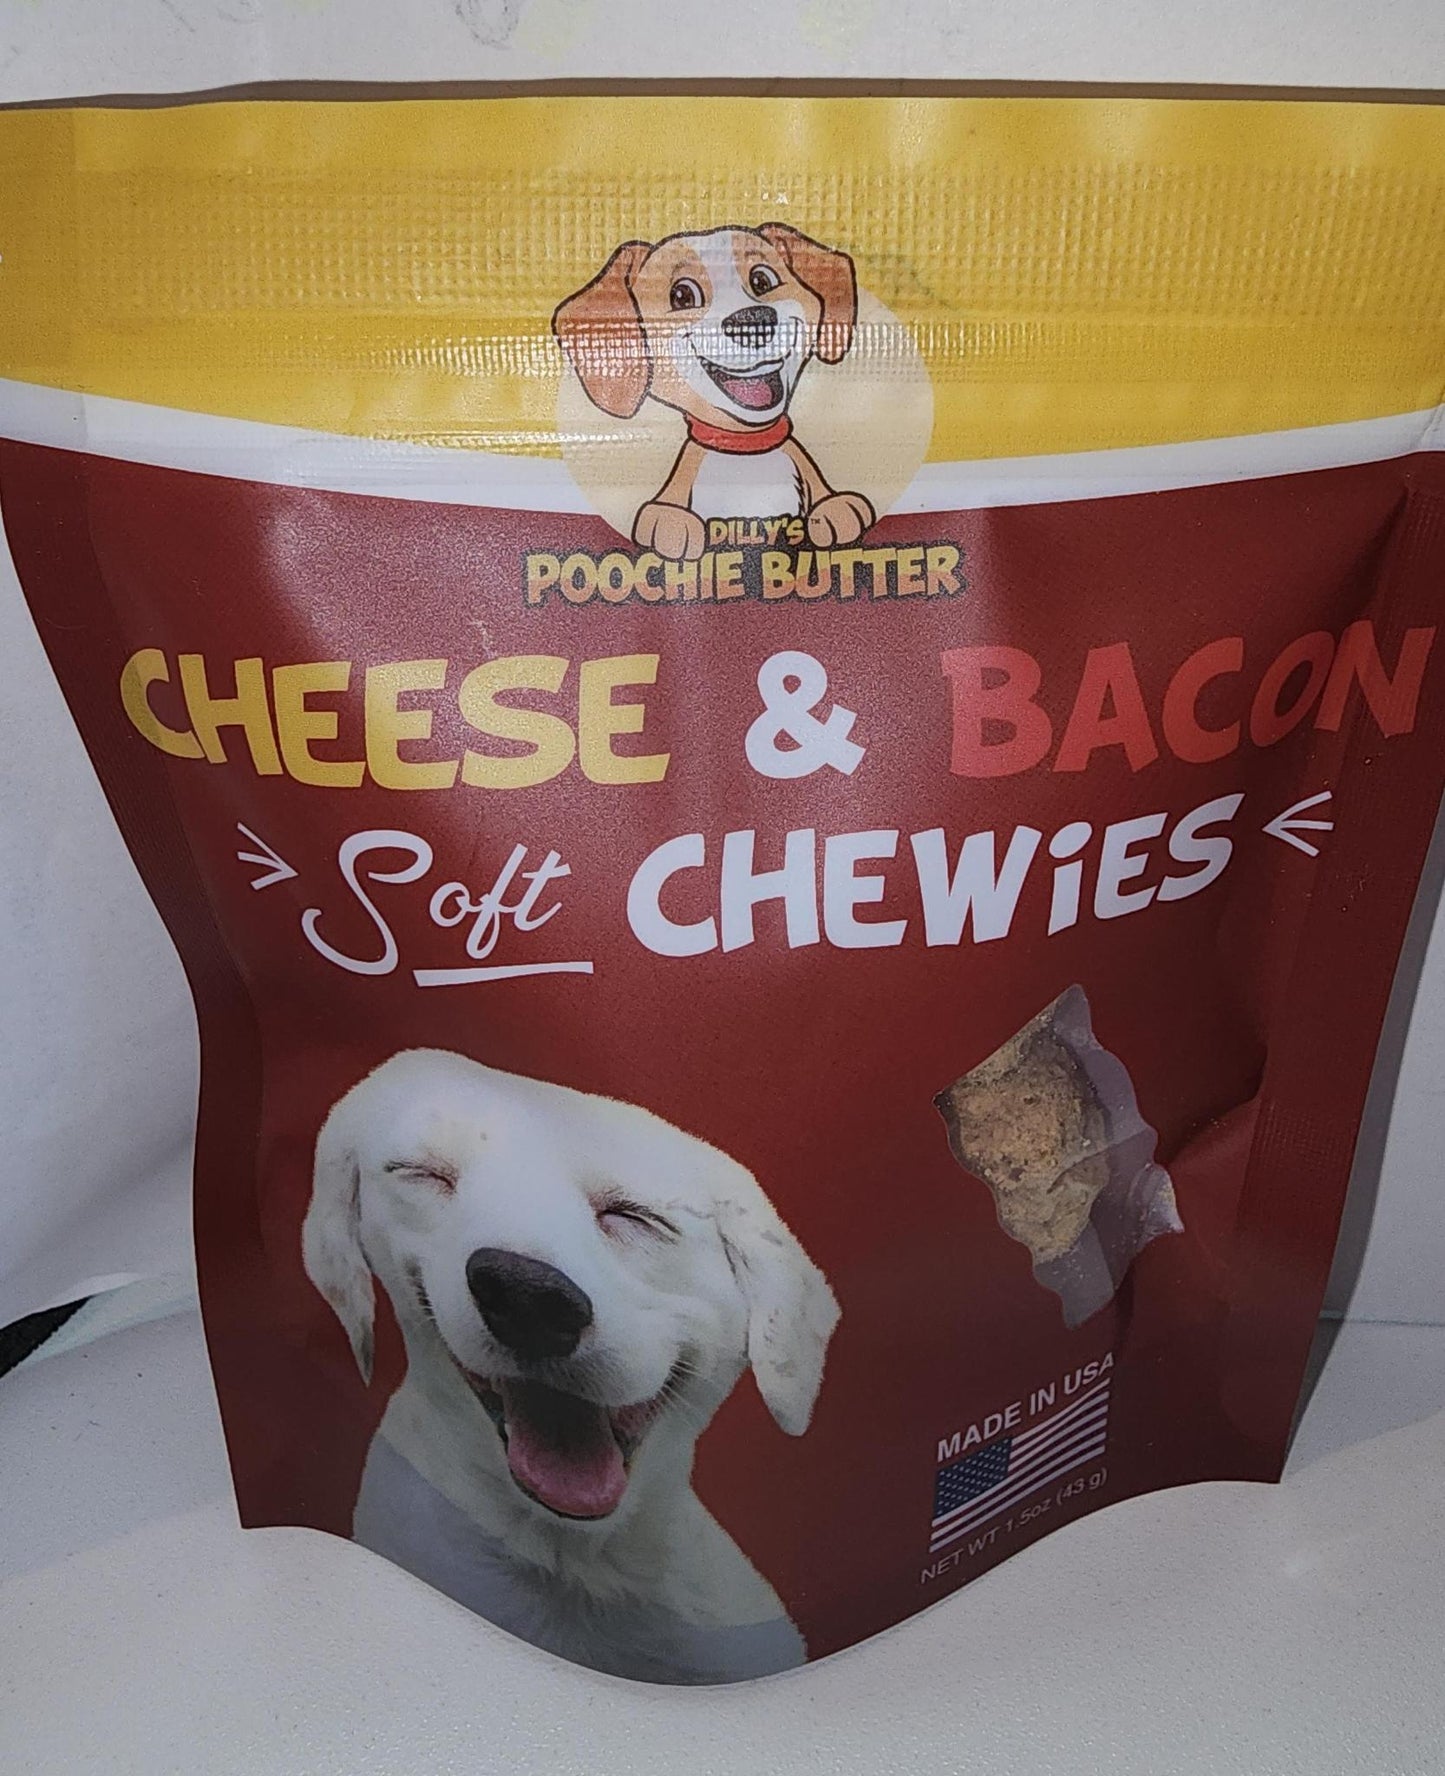 Poochie Butter Cheese & Bacon Soft Chewies